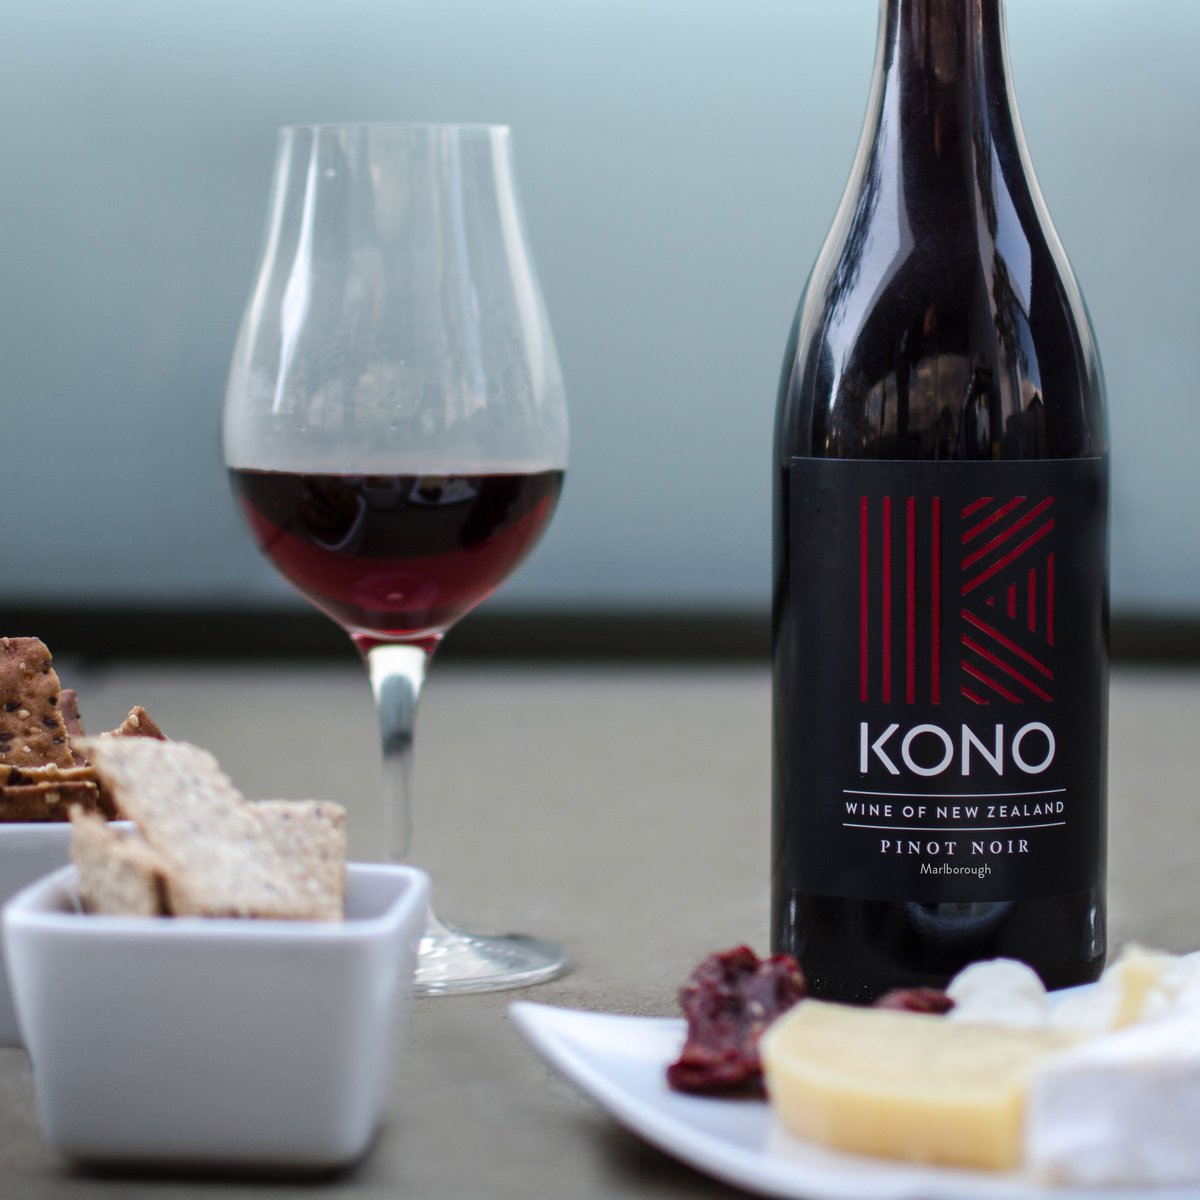 We don’t need a reason for friends, cheese and Pinot but there’s no better excuse than a long weekend! Happy Easter! 
.
#konowines #nzwine #celebration #winenot #newzealandwine #marlboroughwine #pinotnoir